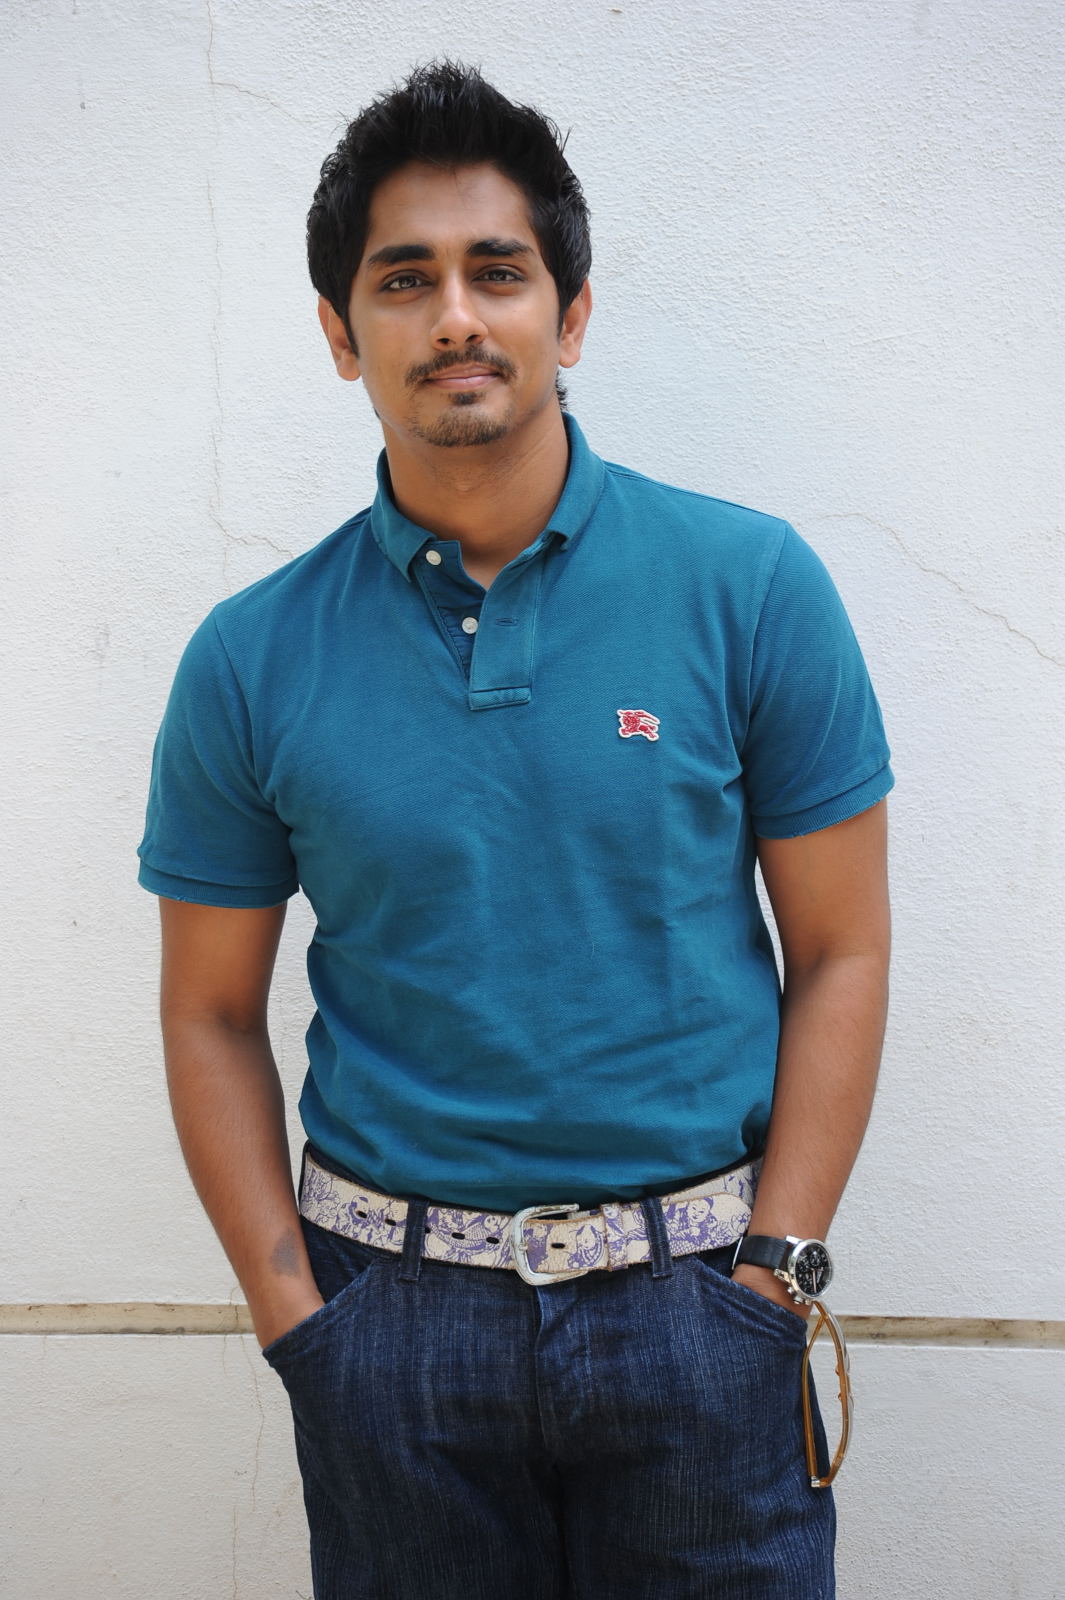 siddharth photos | Picture 41415